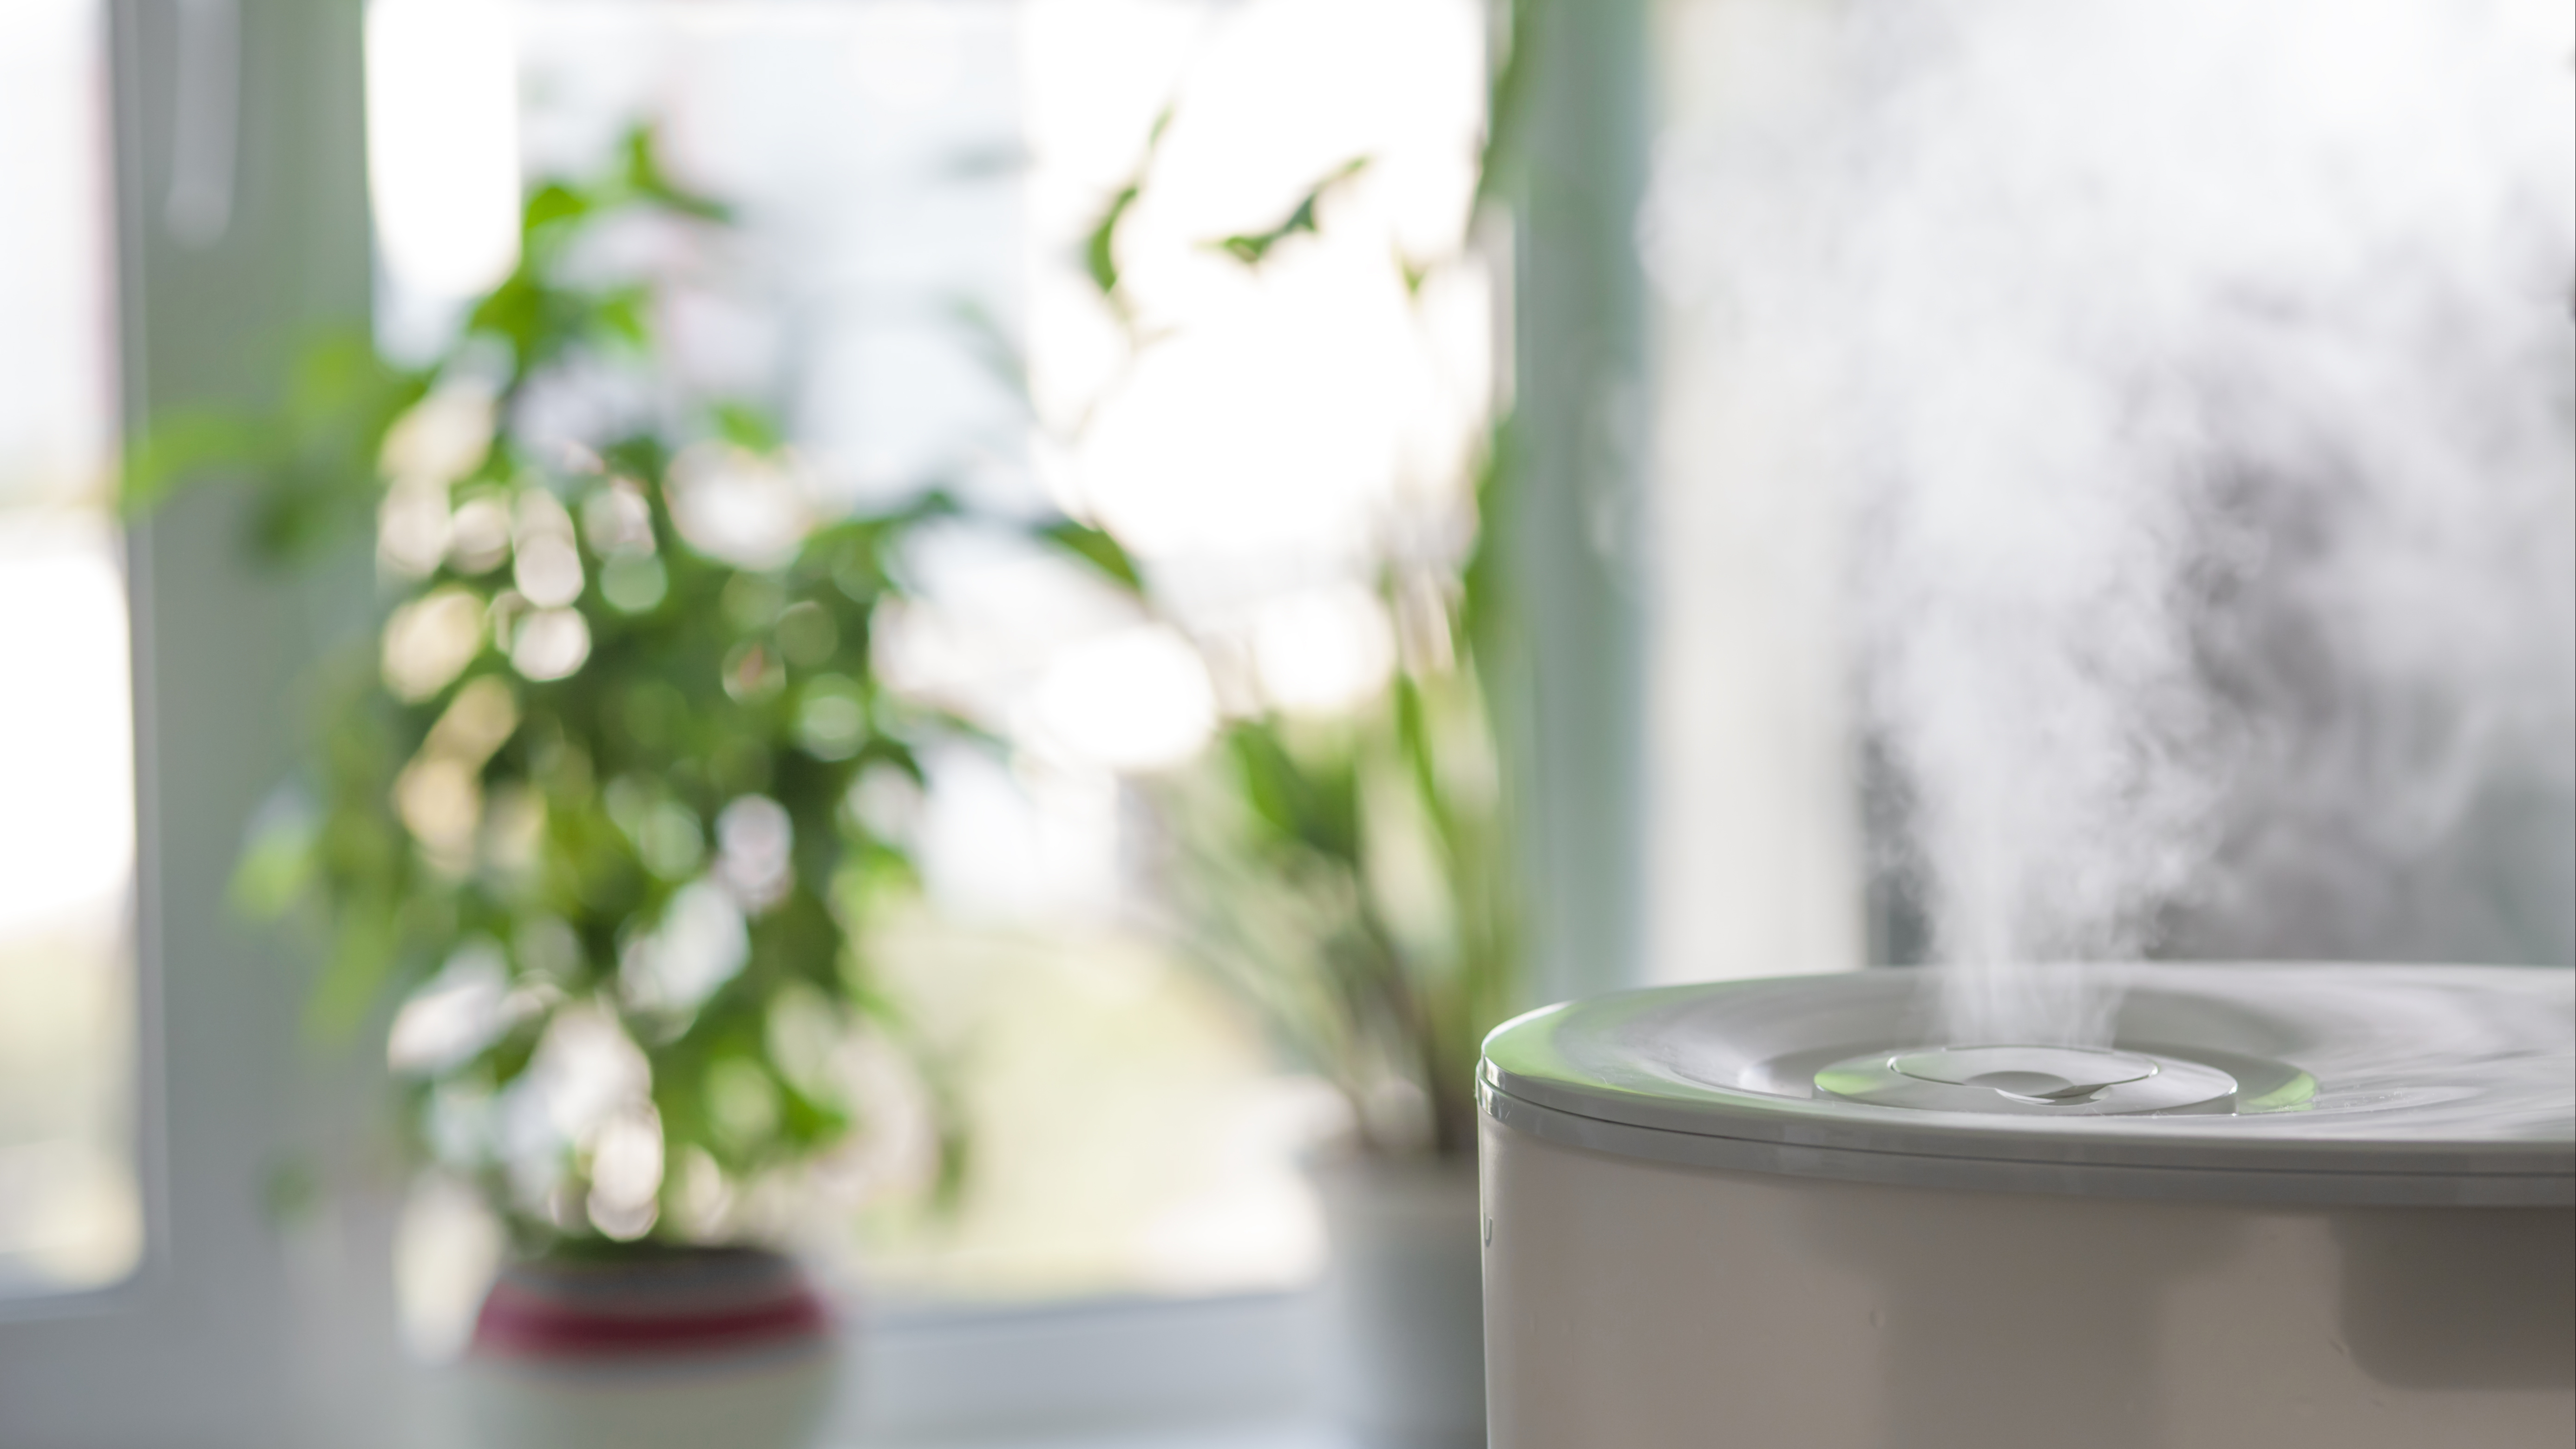 The best humidifiers of 2019: the top humidifiers tested and compared